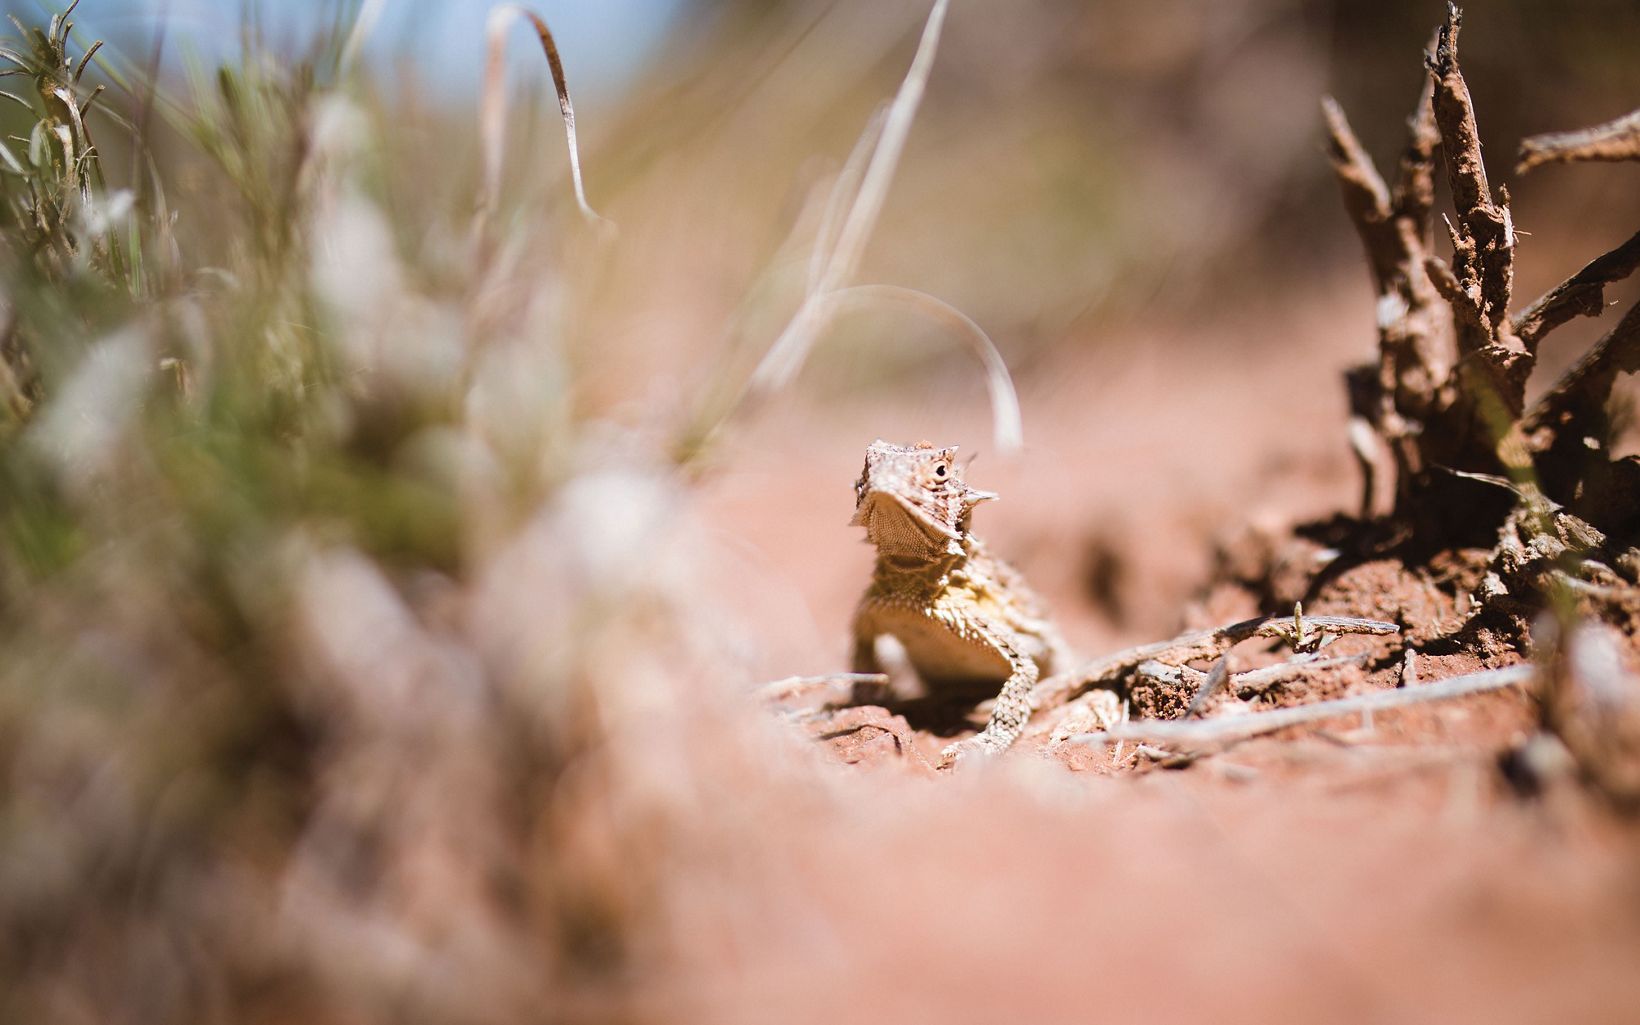 A Texas horned lizard spotted in the short grass at Four Canyon Preserve, OK.